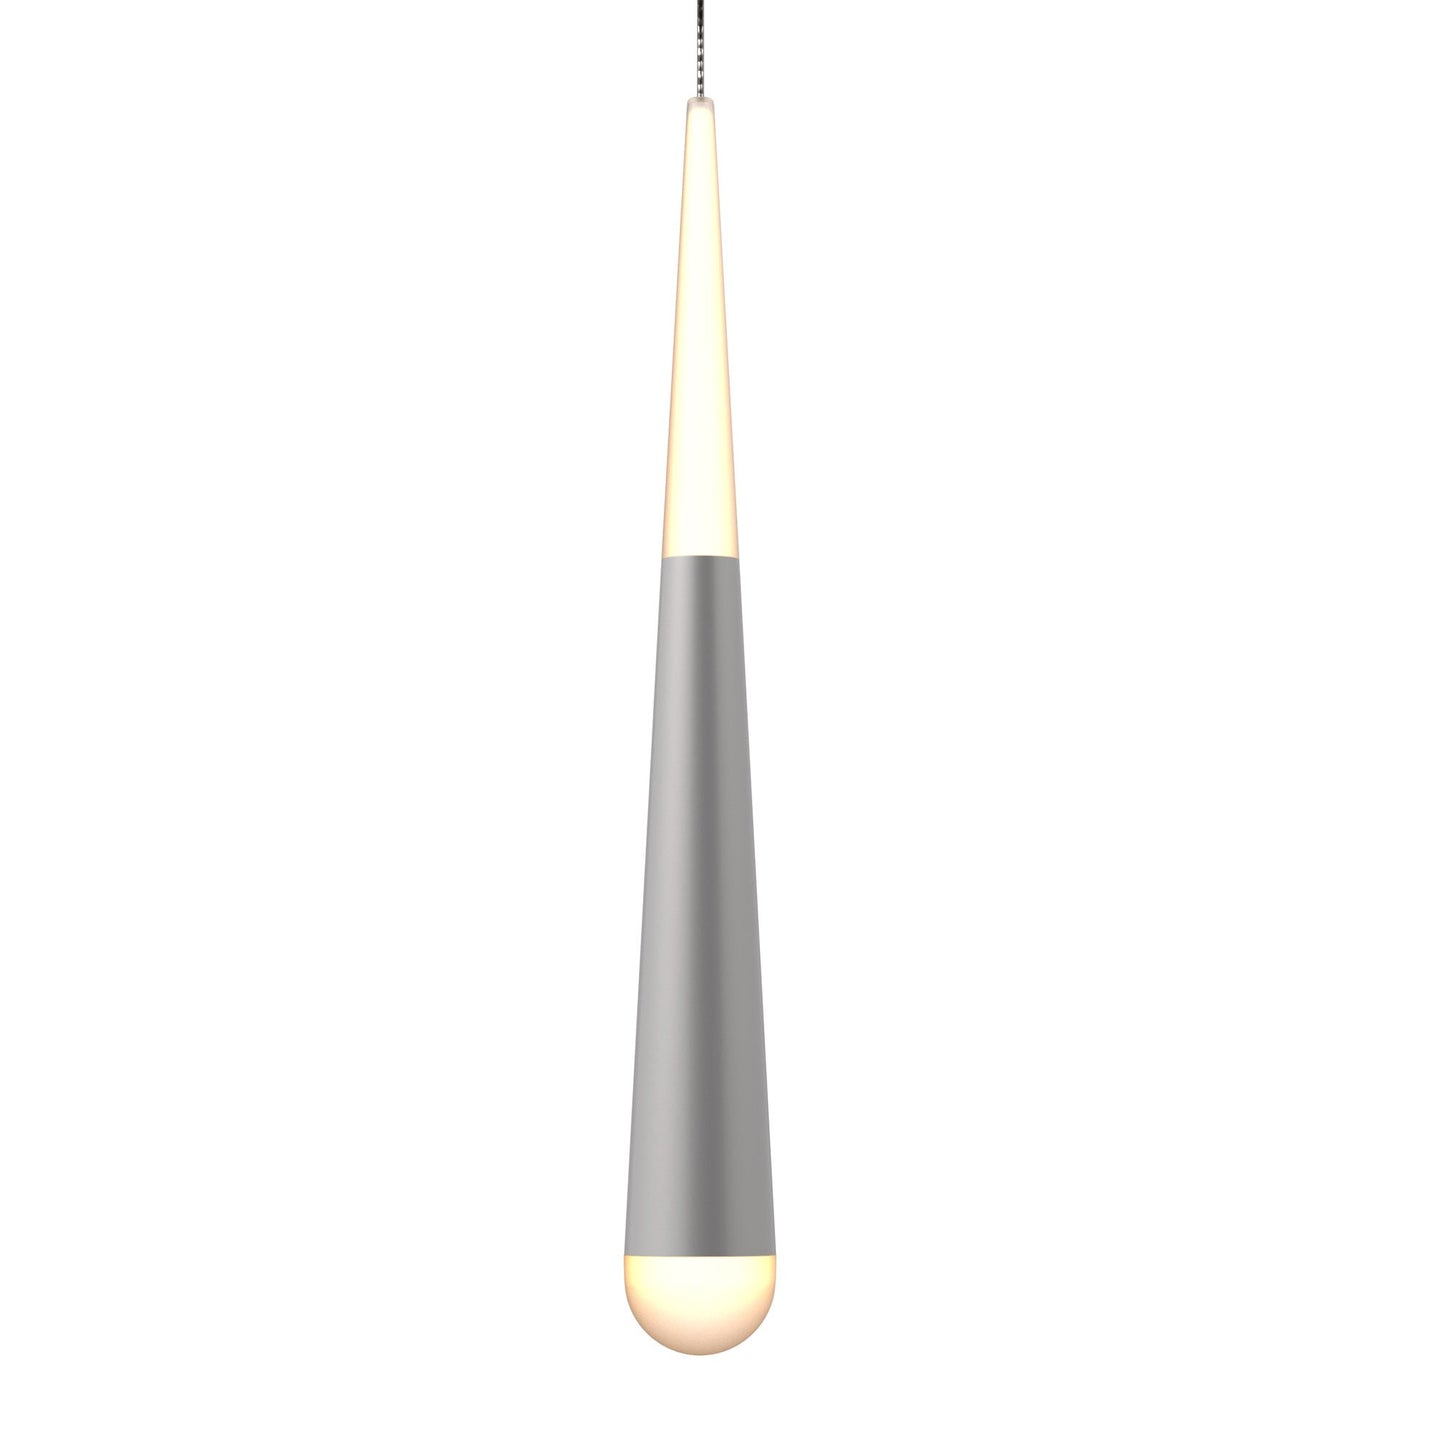 Living Room Pendant For Low Ceiling, 7W, 3000K (Warm White), 348LM, Dimmable, Pendant Mounting